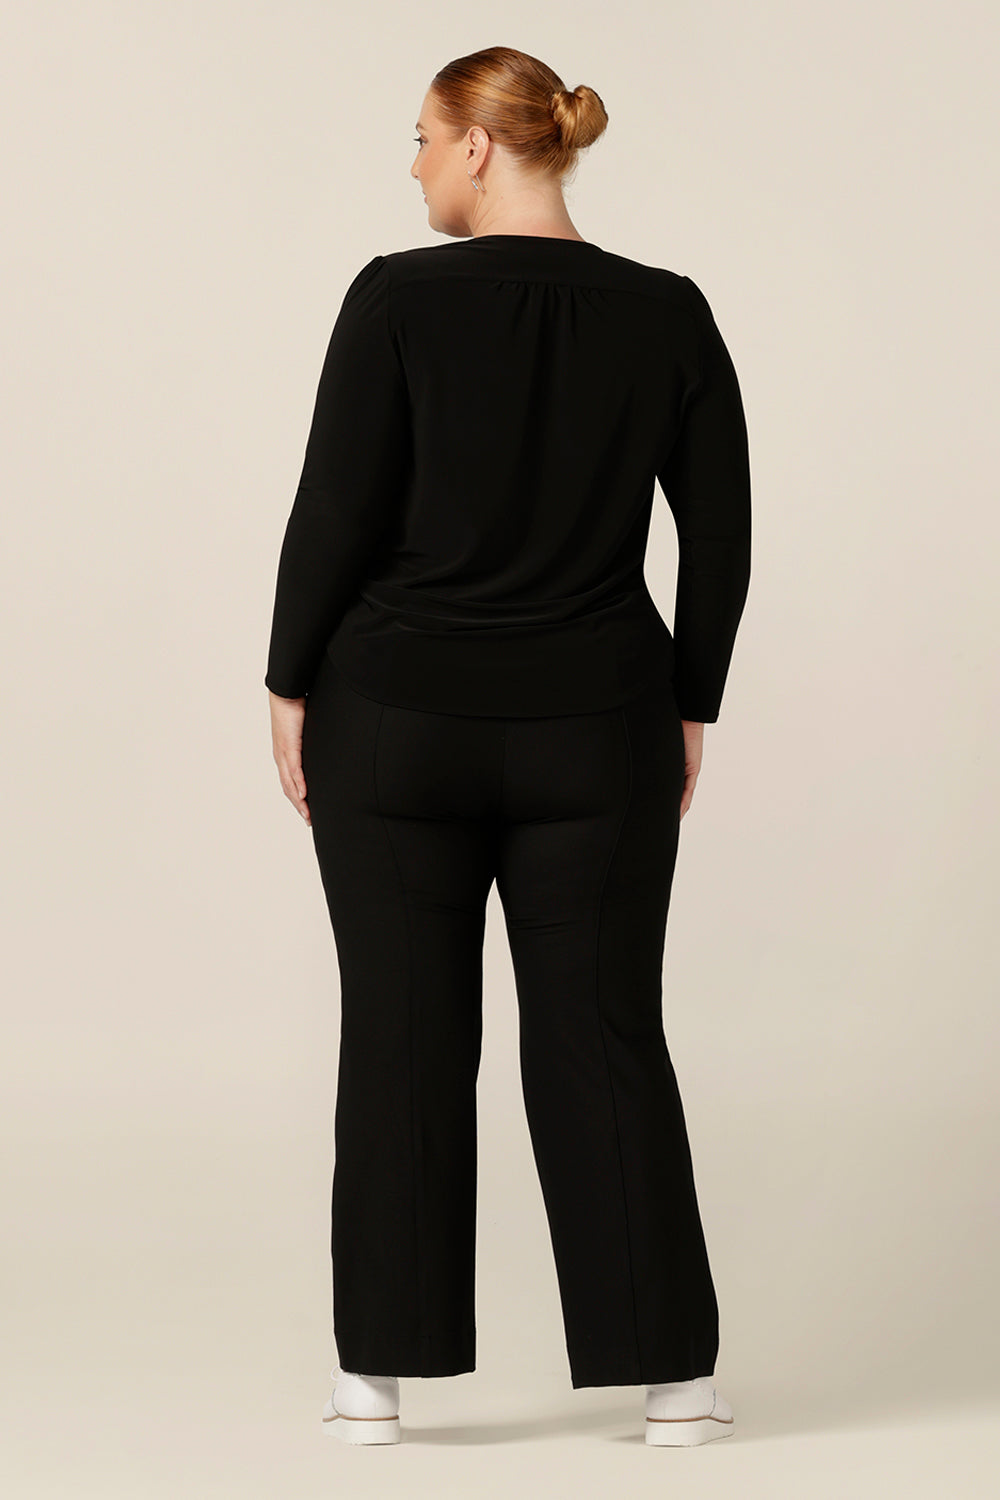 Back view of a size 18, fuller figure woman wearing a long sleeve, V neck top in black jersey. Worn with black bootleg pants, this is a comfortable top for work or casual wear and, made in Australia it comes with quality assurance.